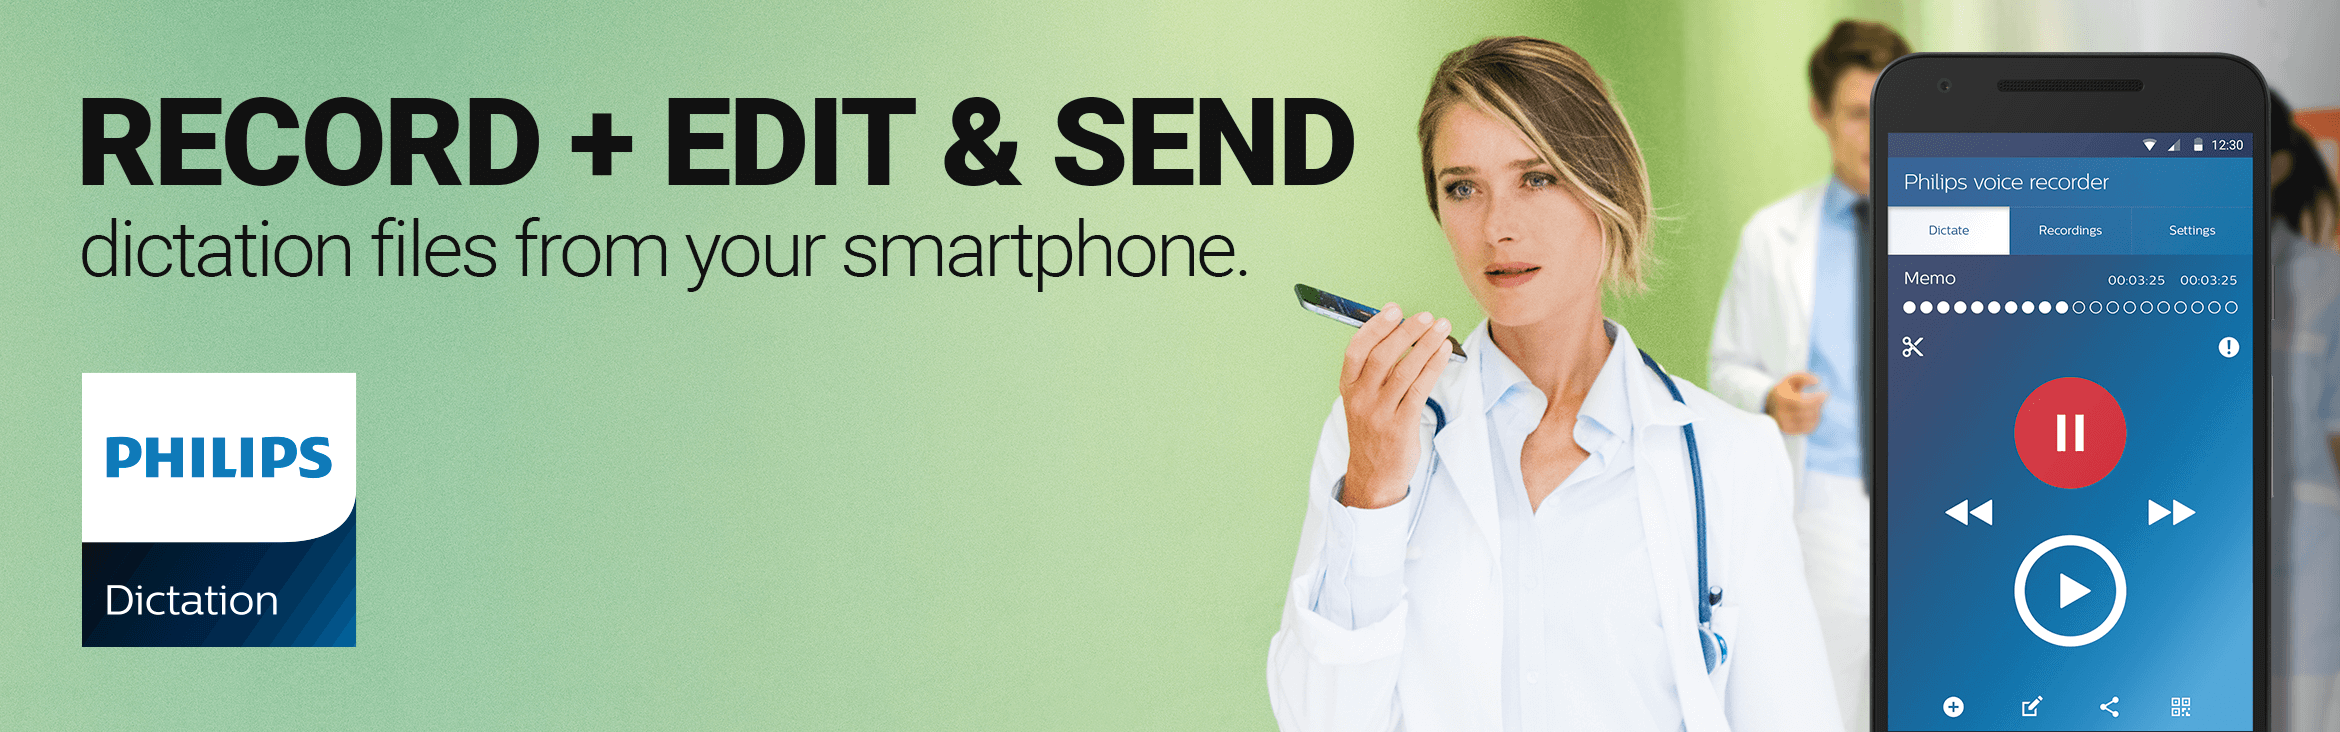 Record + edit & send dictation files from your smartphone.